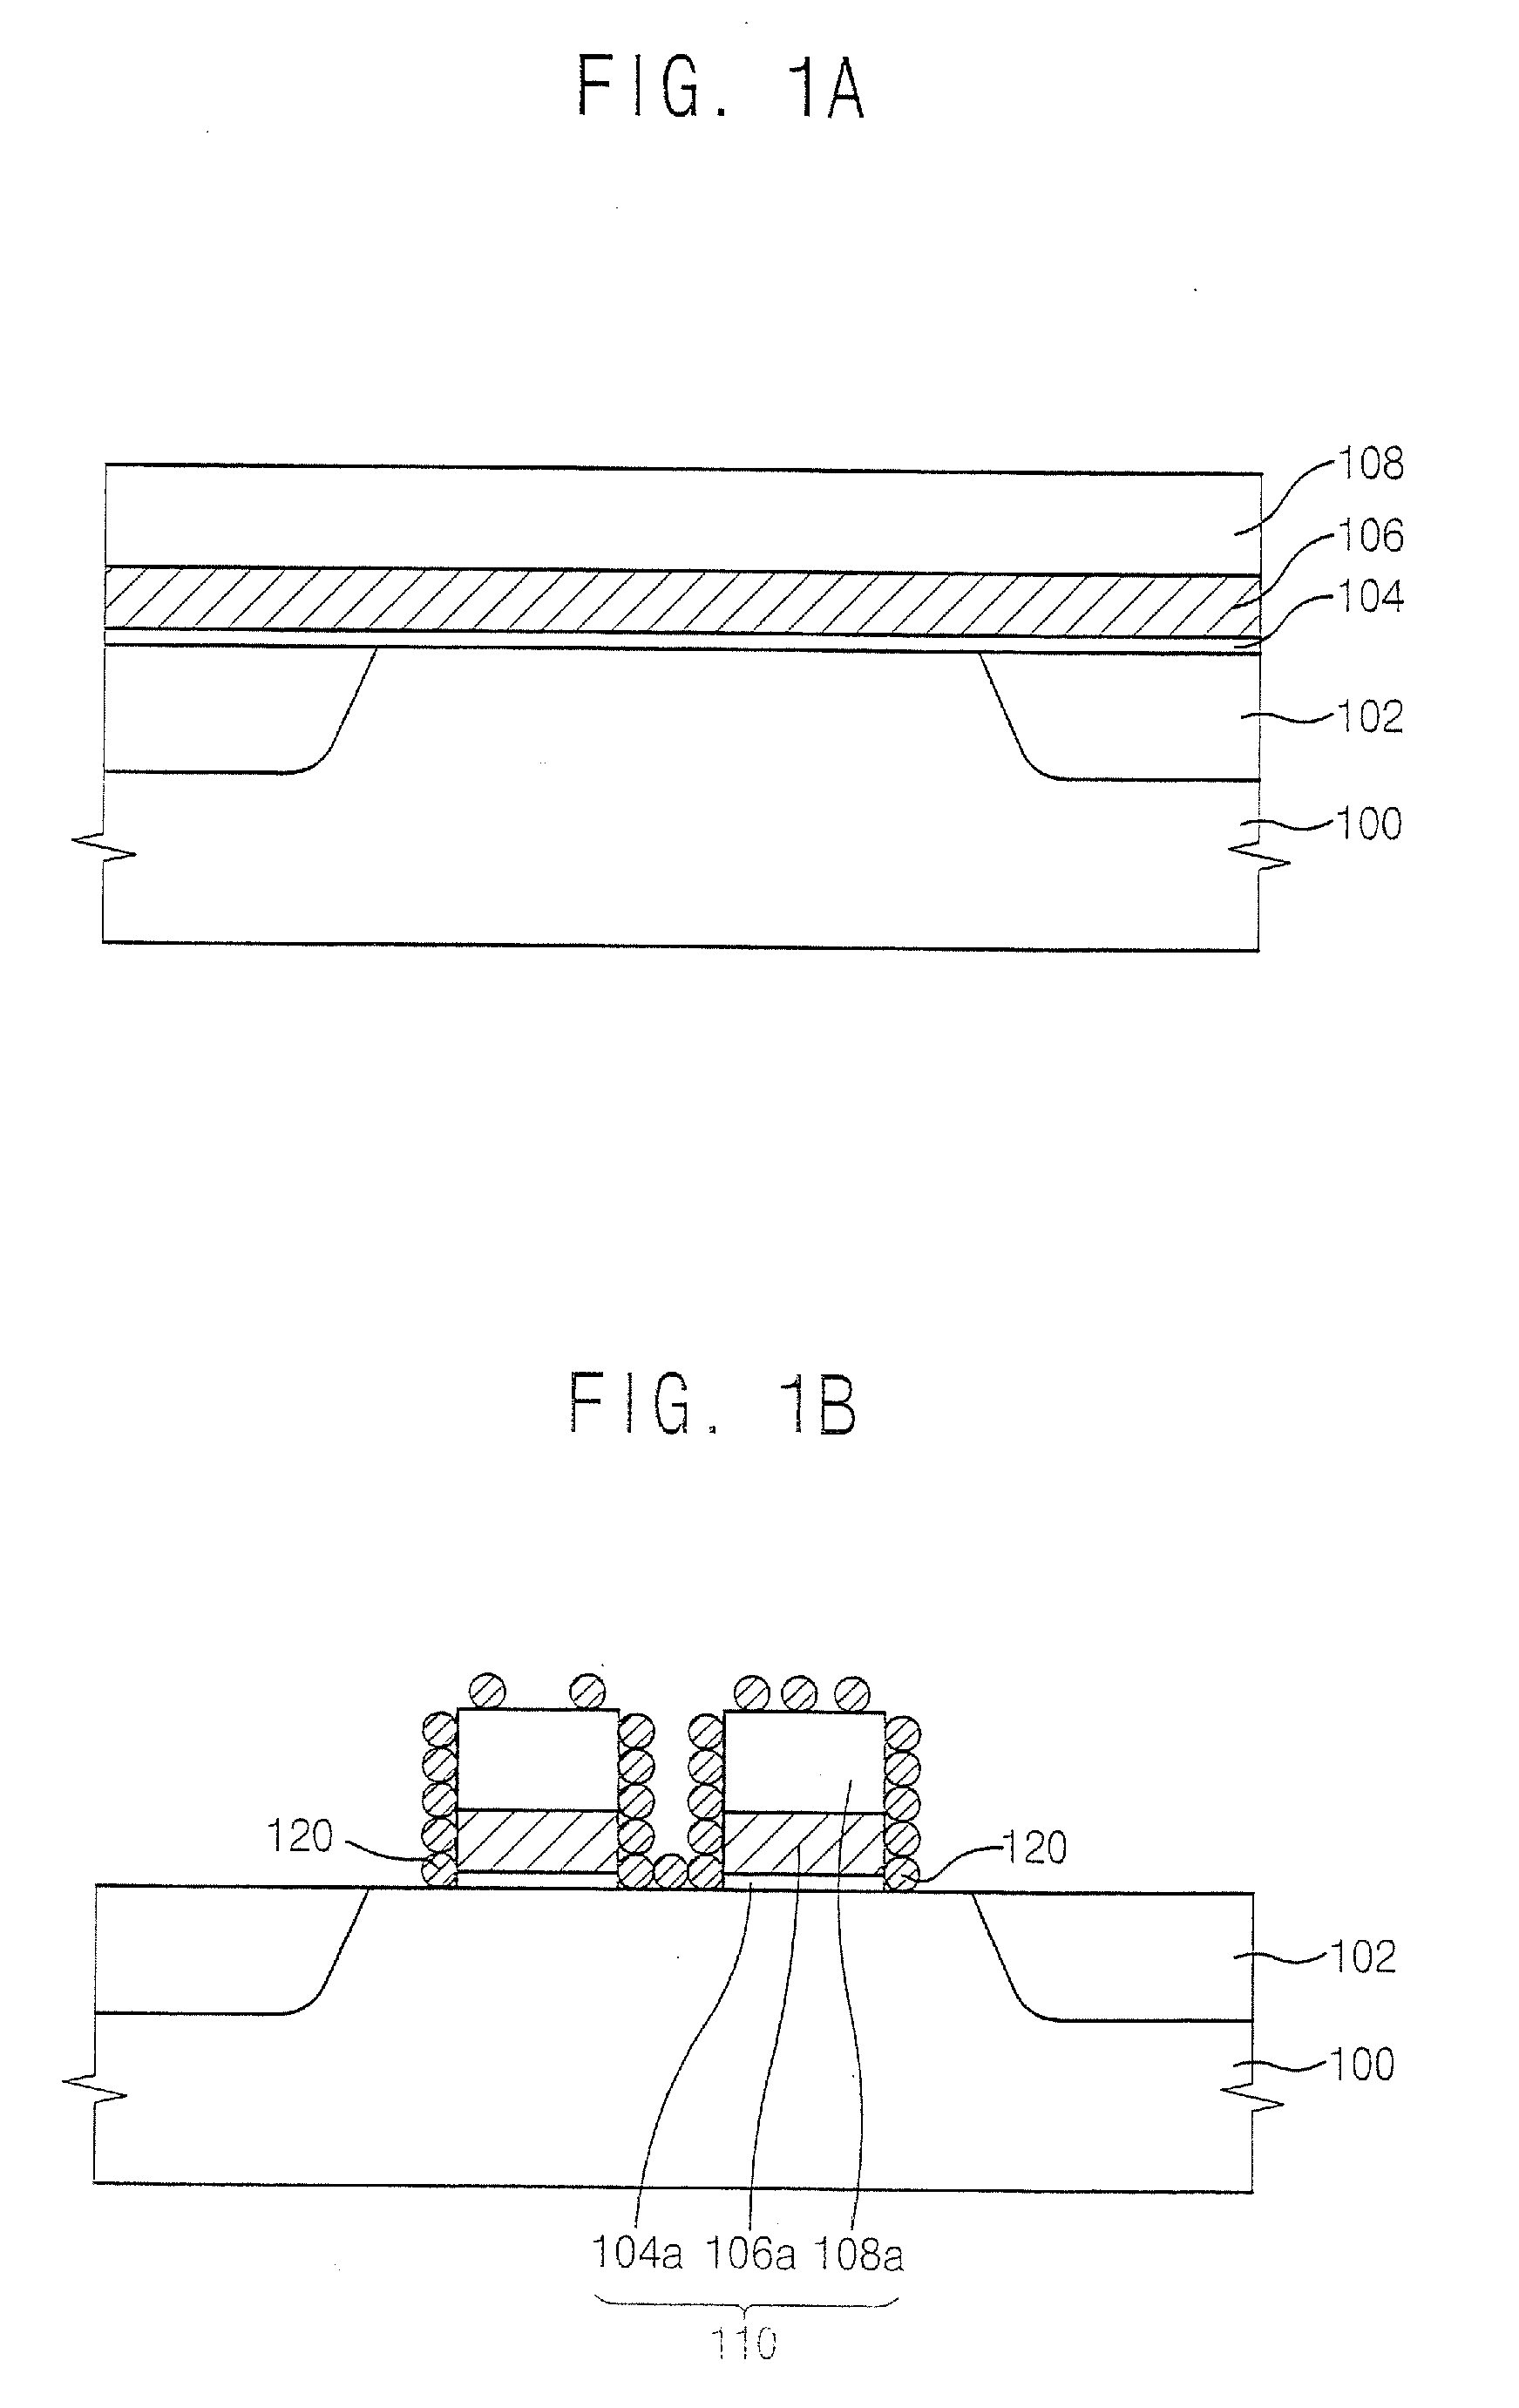 Methods of using corrosion-inhibiting cleaning compositions for metal layers and patterns on semiconductor substrates